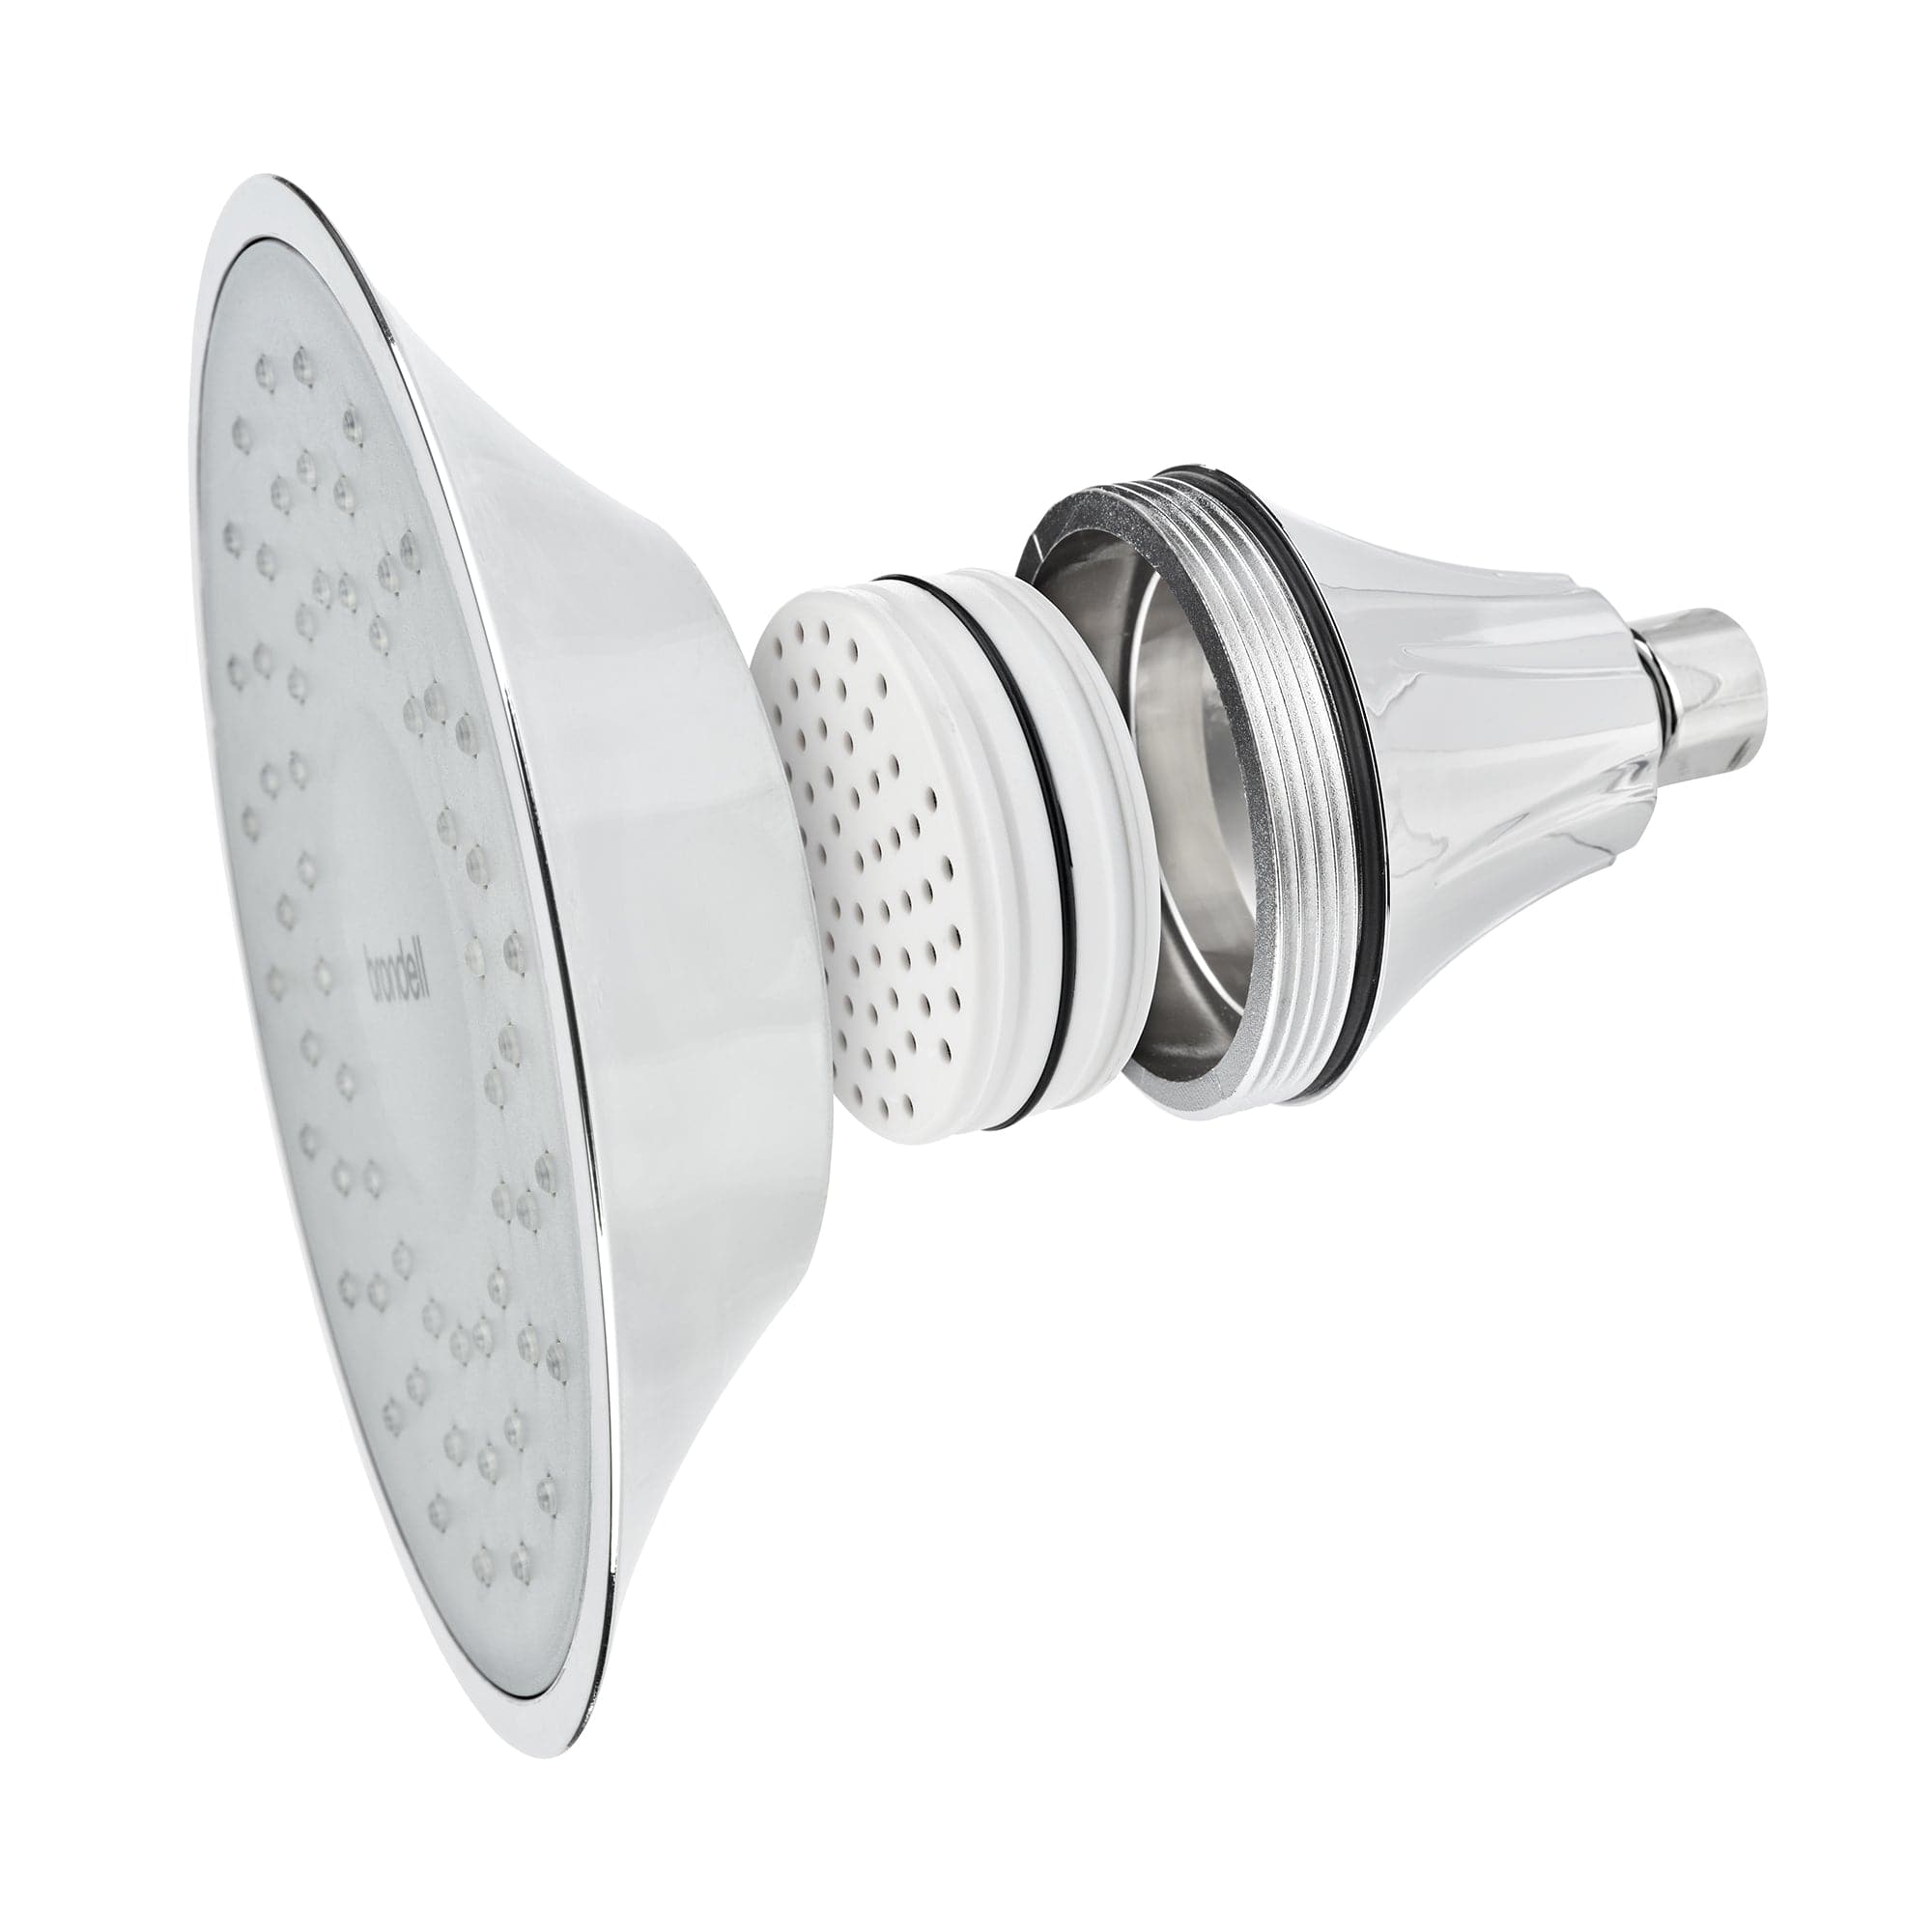 VivaSpring Filtered Showerhead in Chrome with Slate Face - Molaix819911012725VIVASPRING FILTERED SHOWER HEADFSH25-CG